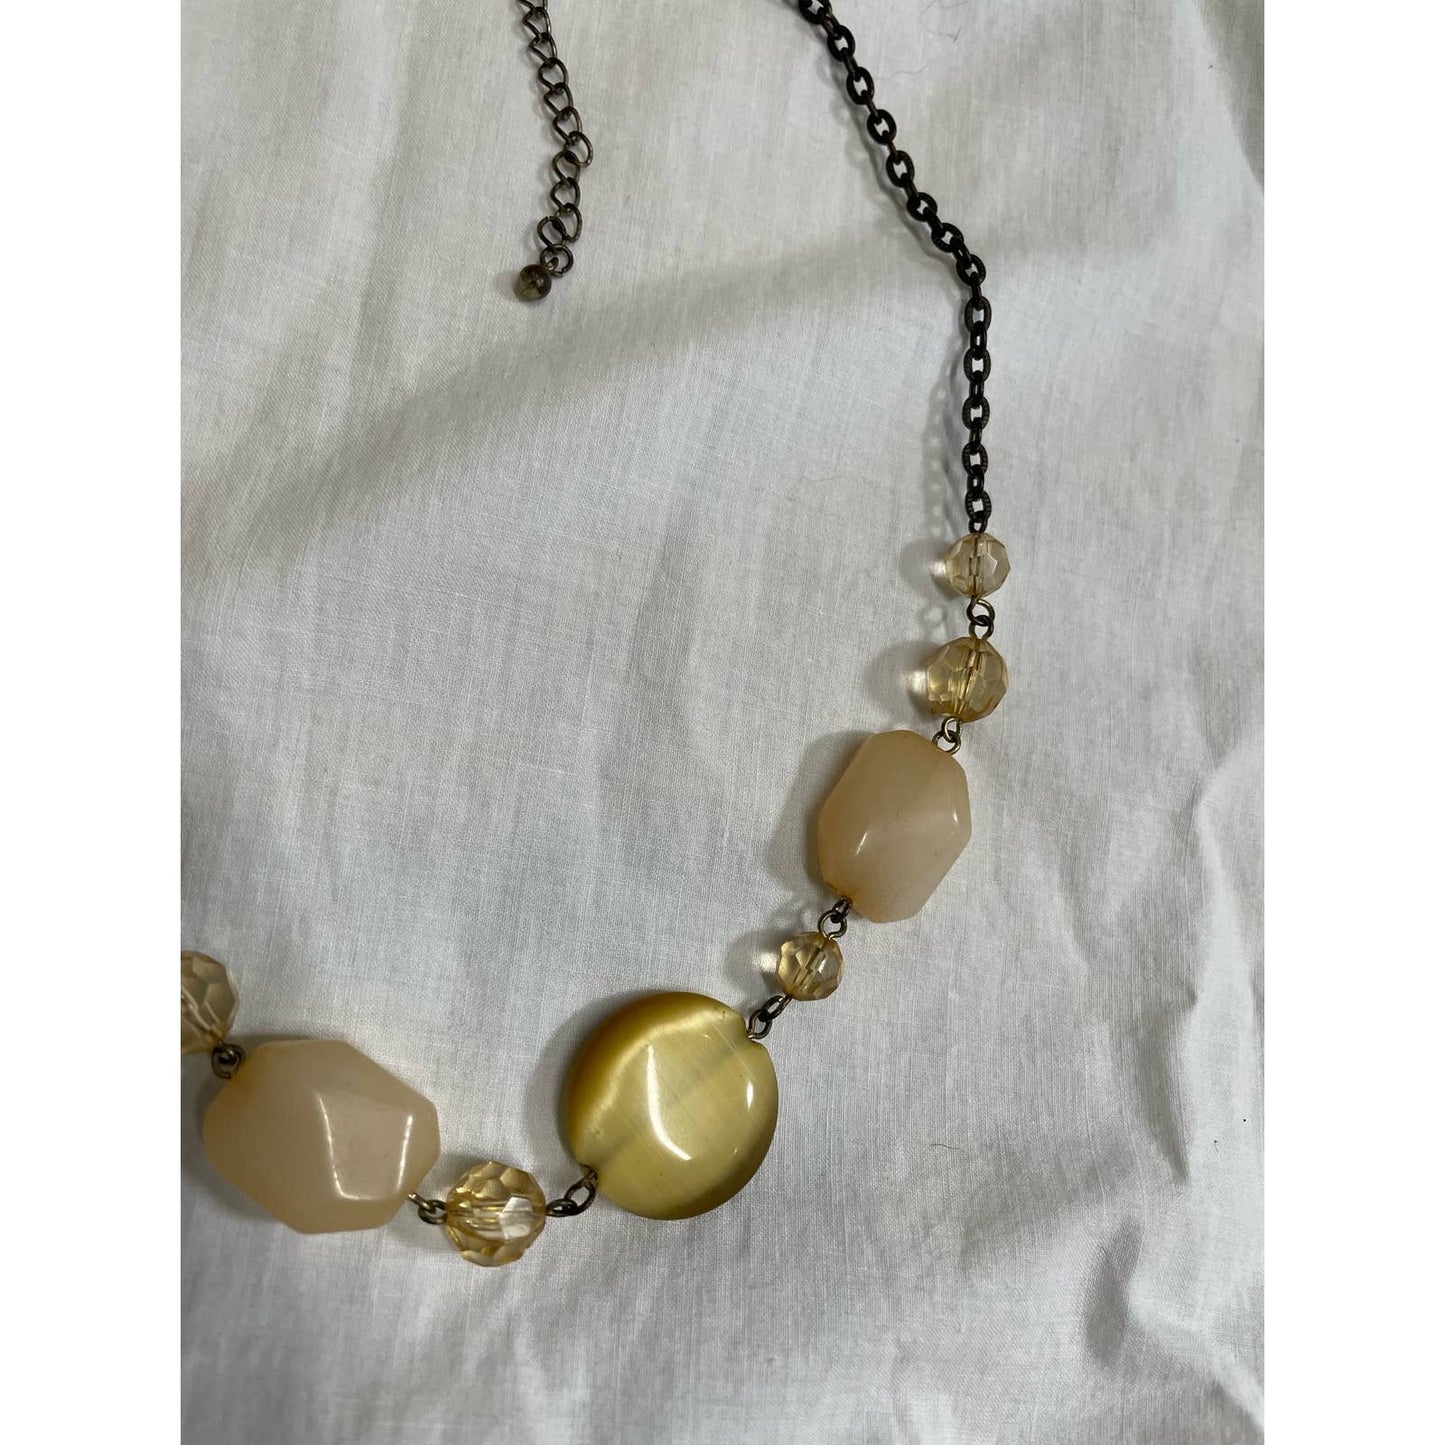 Vintage 90s station chain resin bead adjustable length necklace